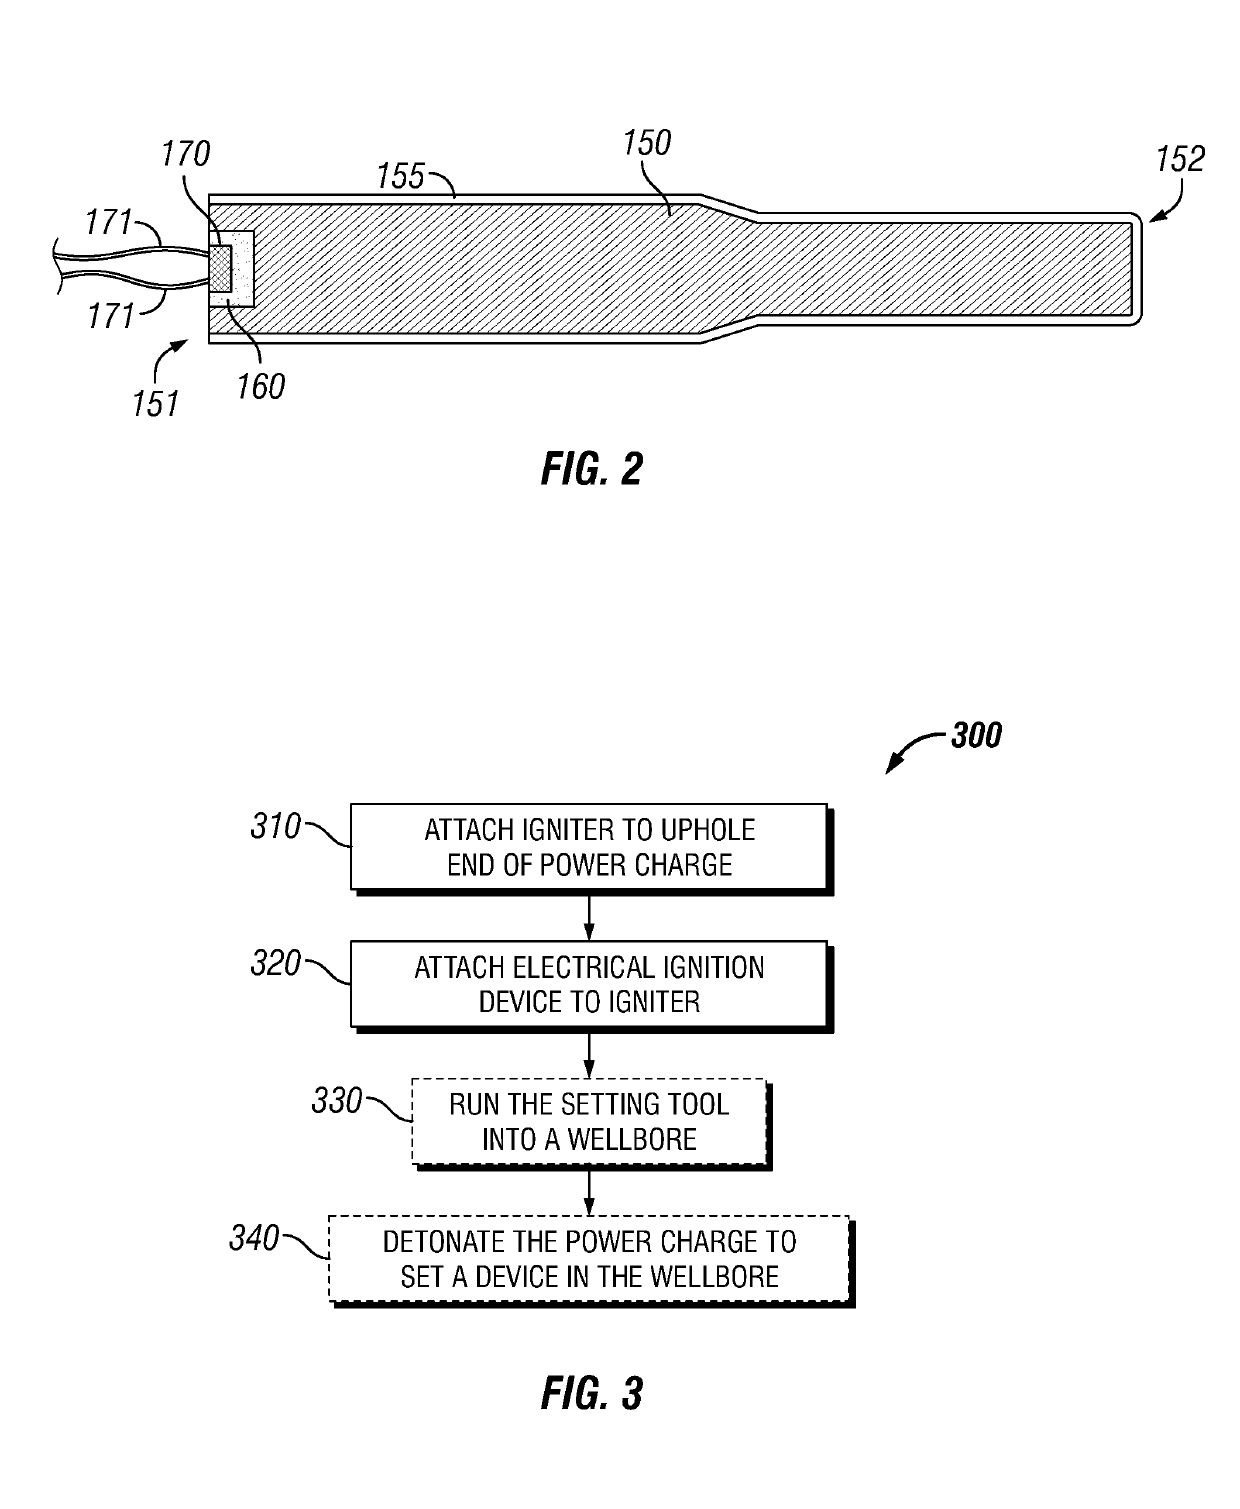 Igniter and Ignition Device for Downhole Setting Tool Power Charge